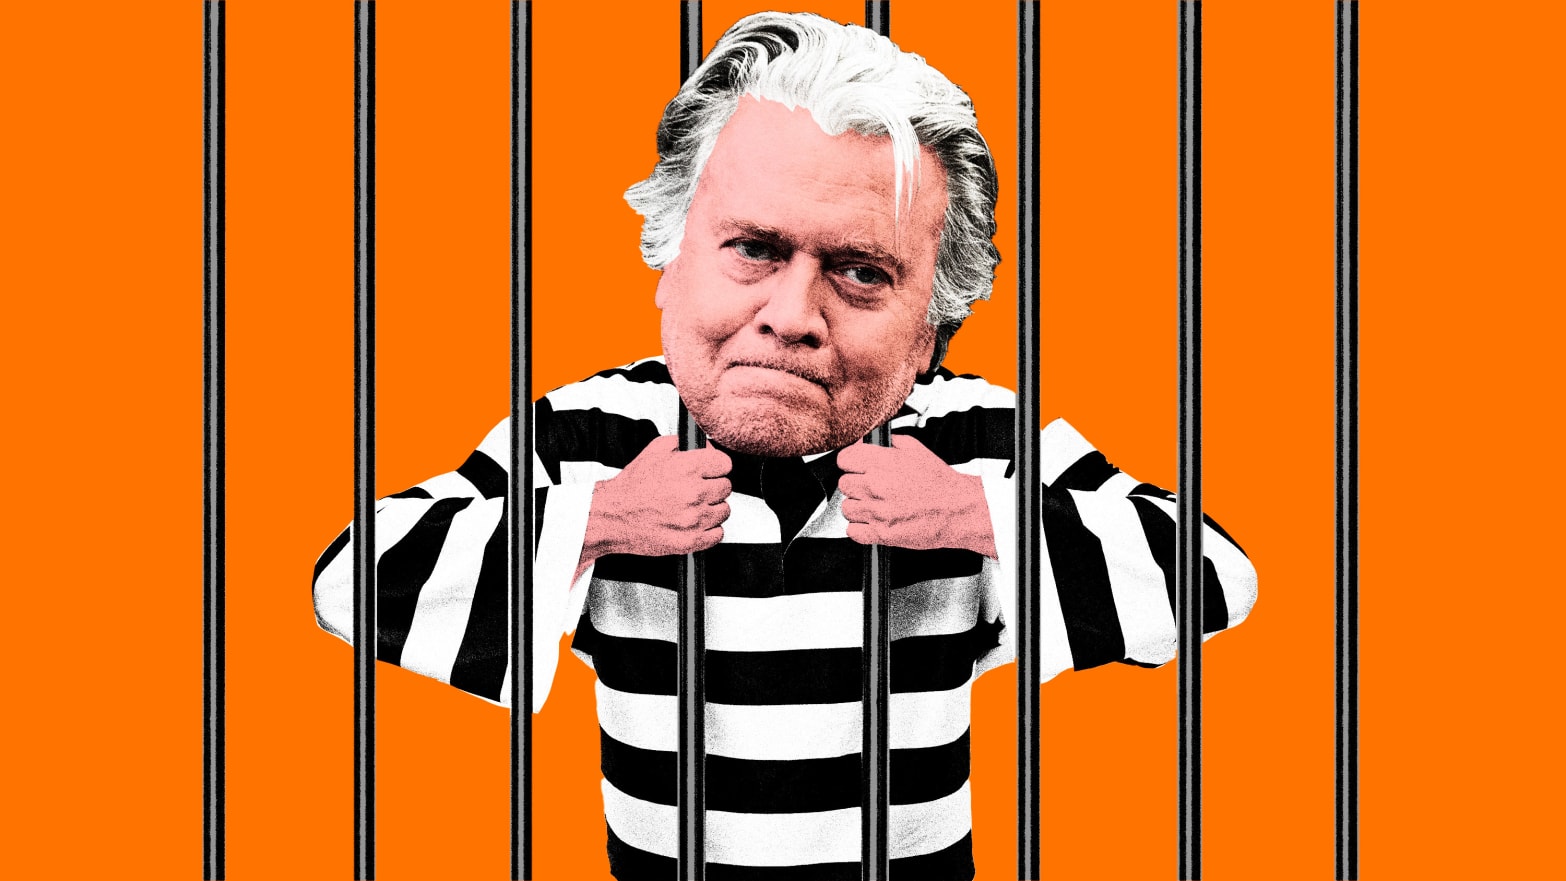 Photo illustration of Steve Bannon behind bars in a striped prison outfit